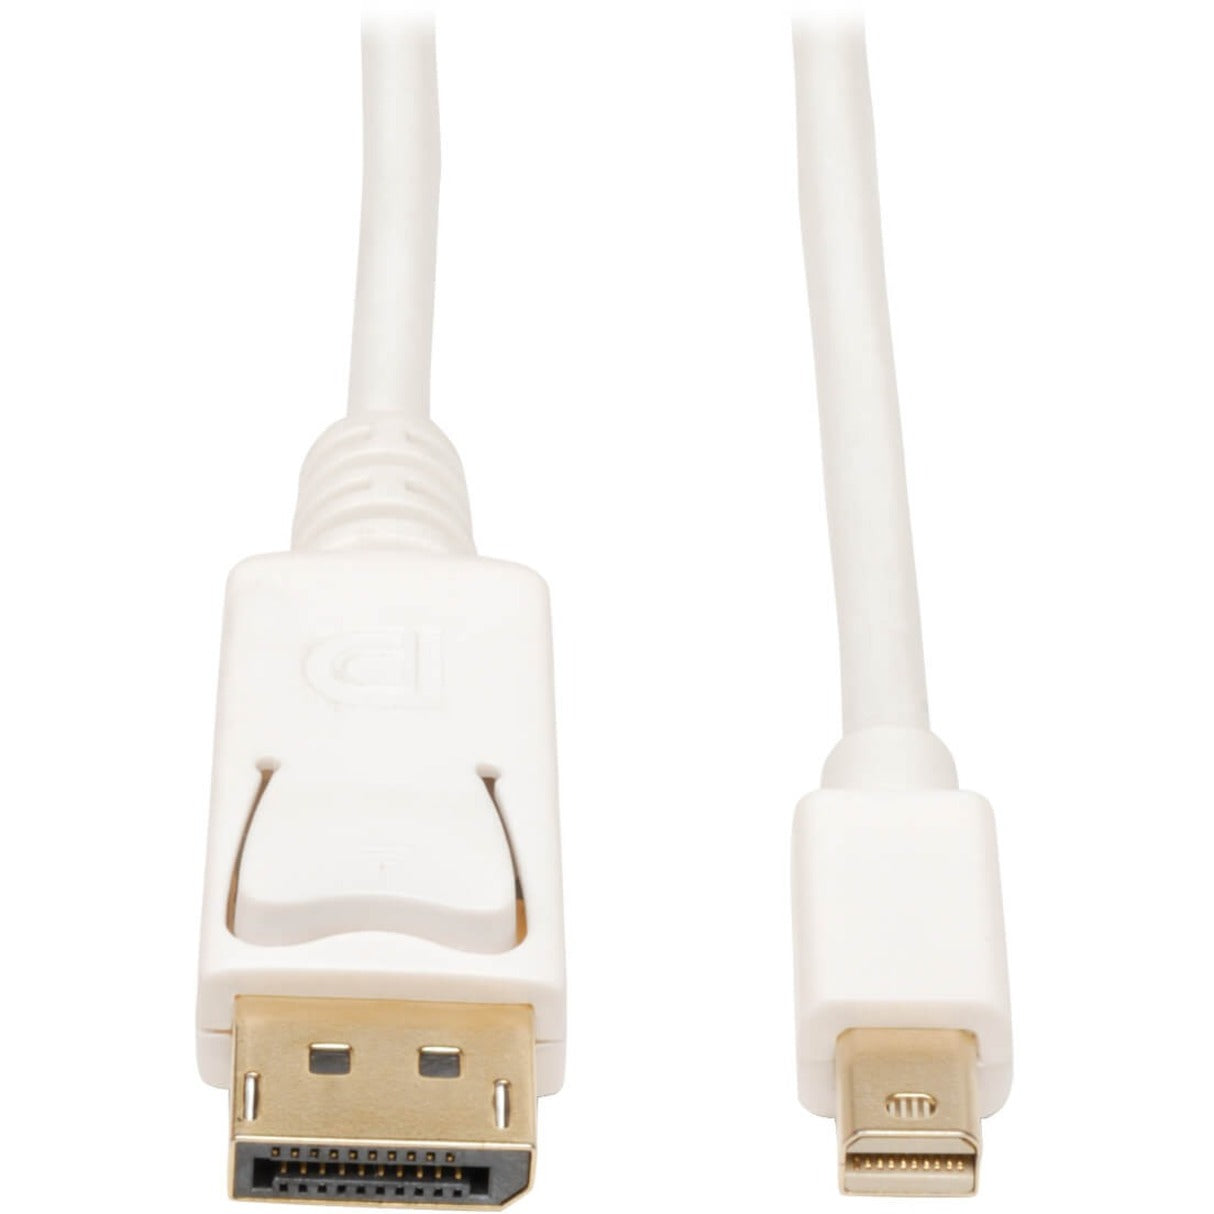 Tripp Lite P583-006 6ft Mini Displayport to Displayport Cable, Flexible, Strain Relief, 21.6 Gbit/s Data Transfer Rate, 4096 x 2160 Supported Resolution